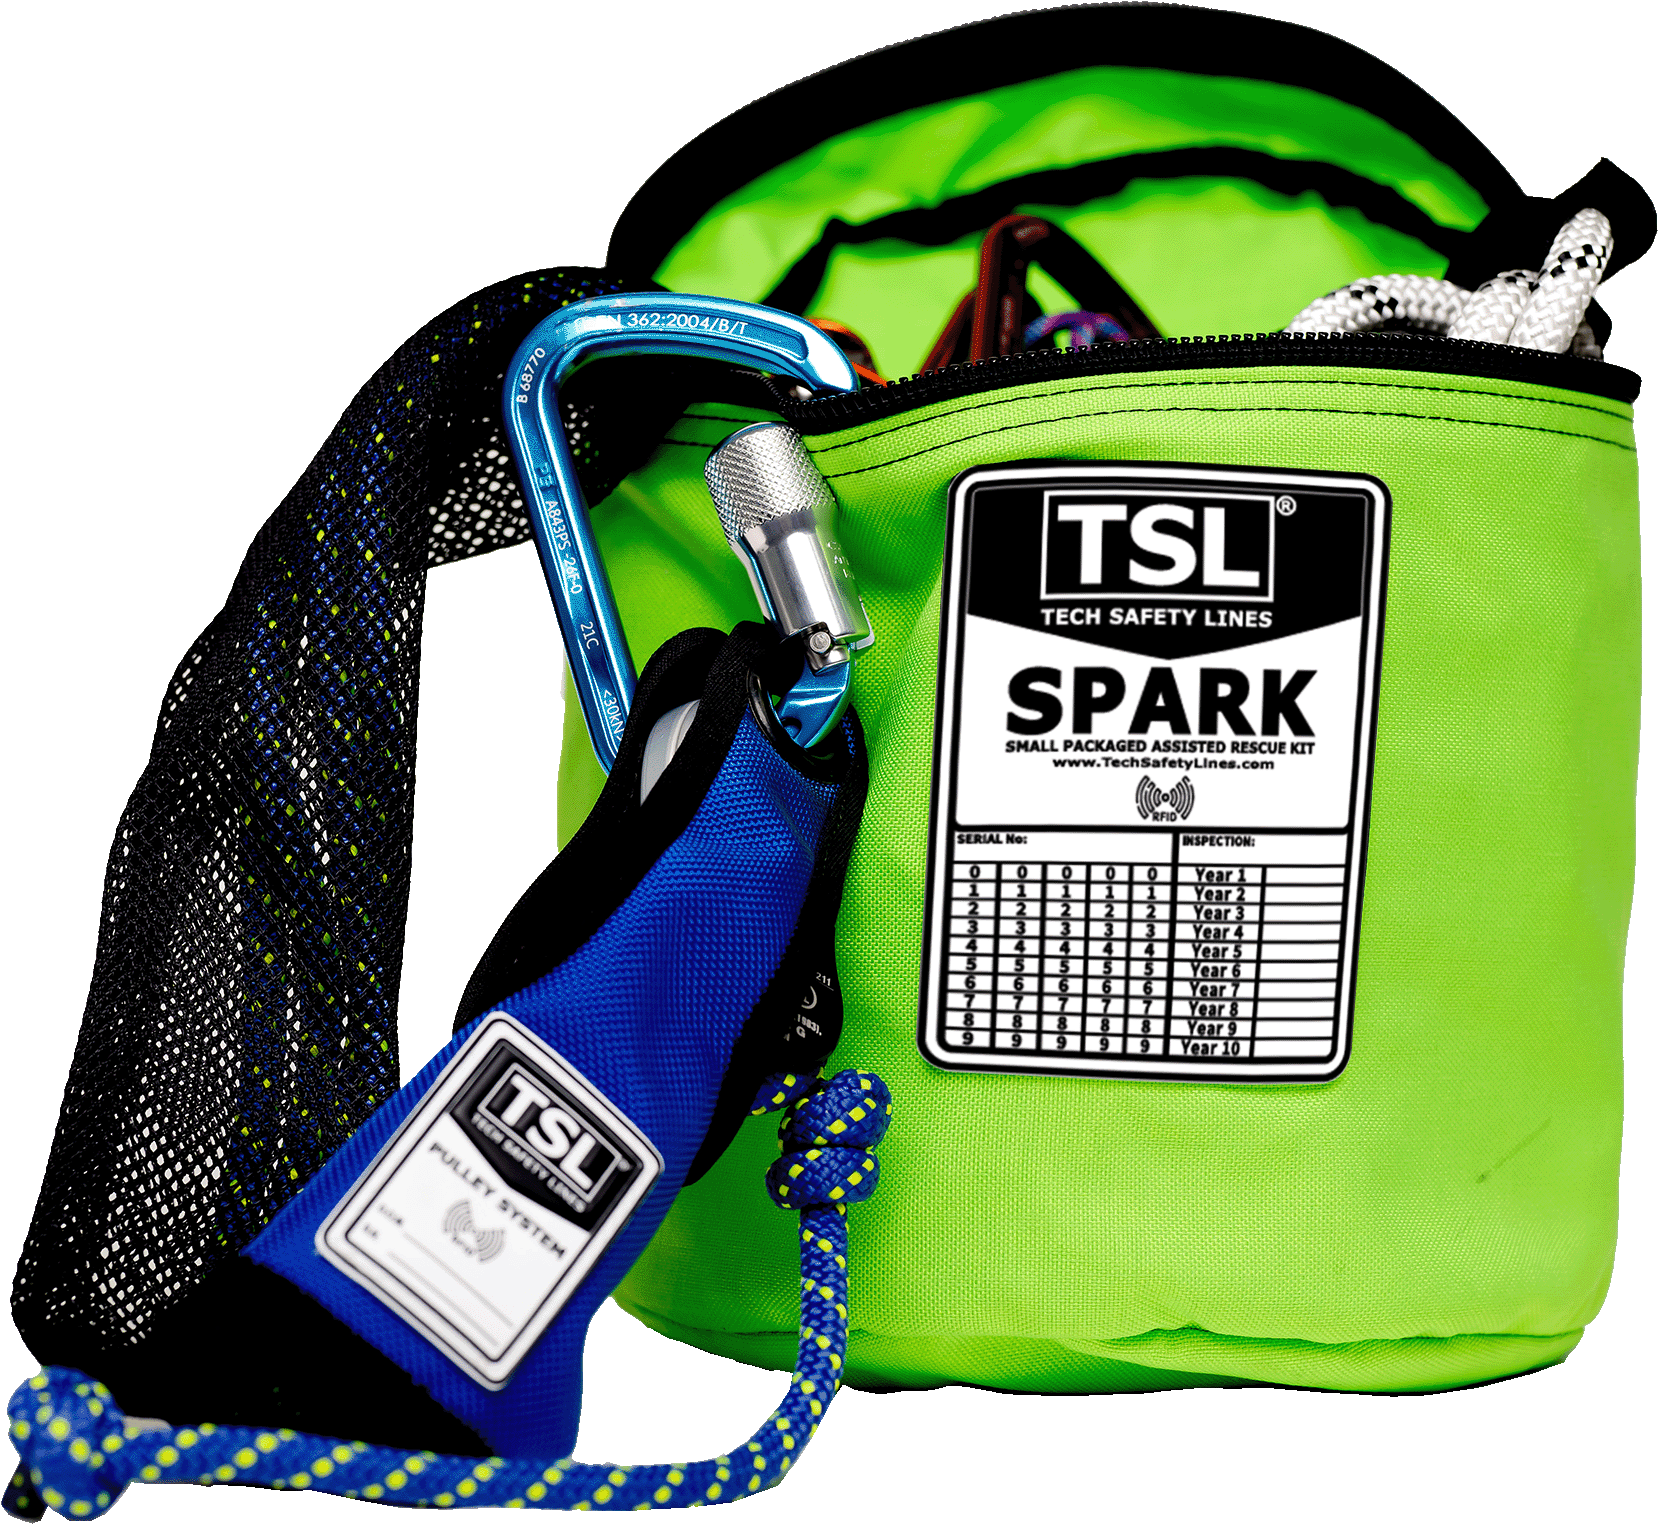 SPARK bag with pulley